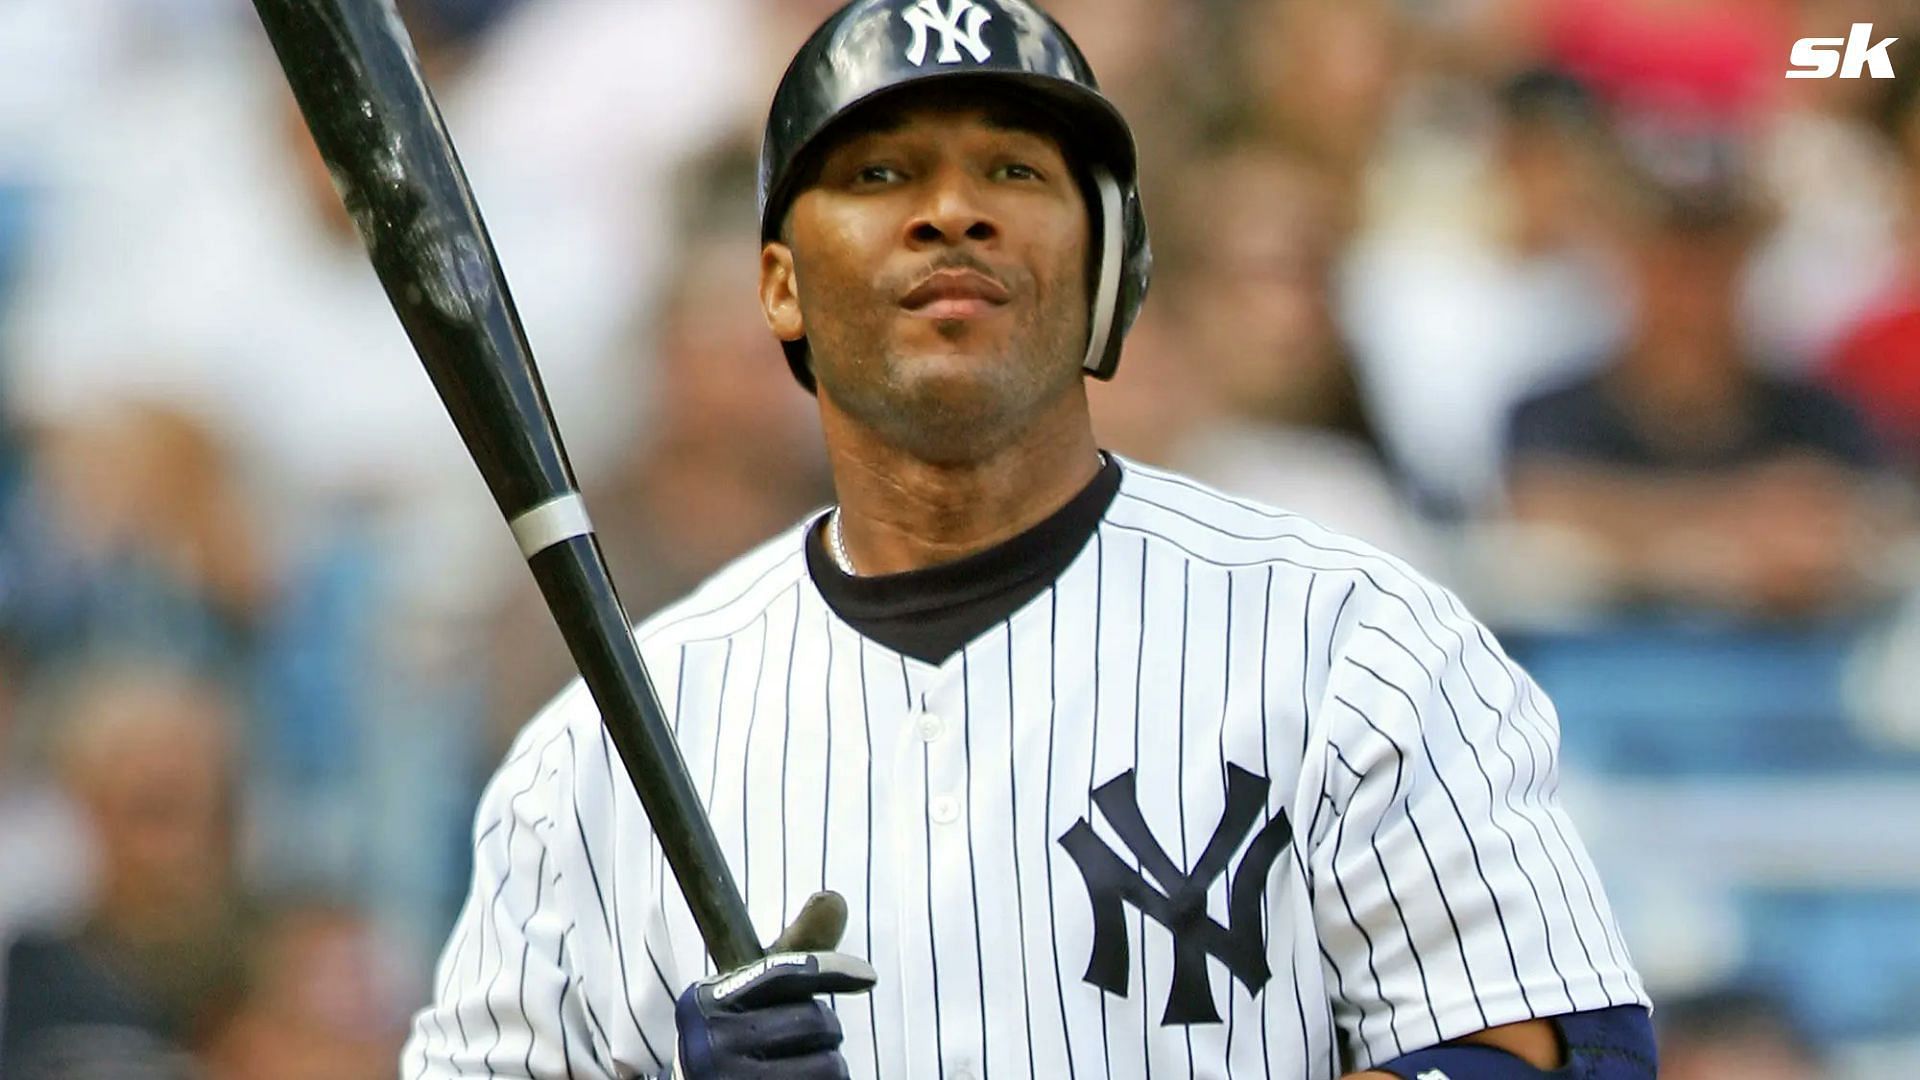 Former MLB outfielder Gary Sheffield.(Pic courtesy: Twitter)